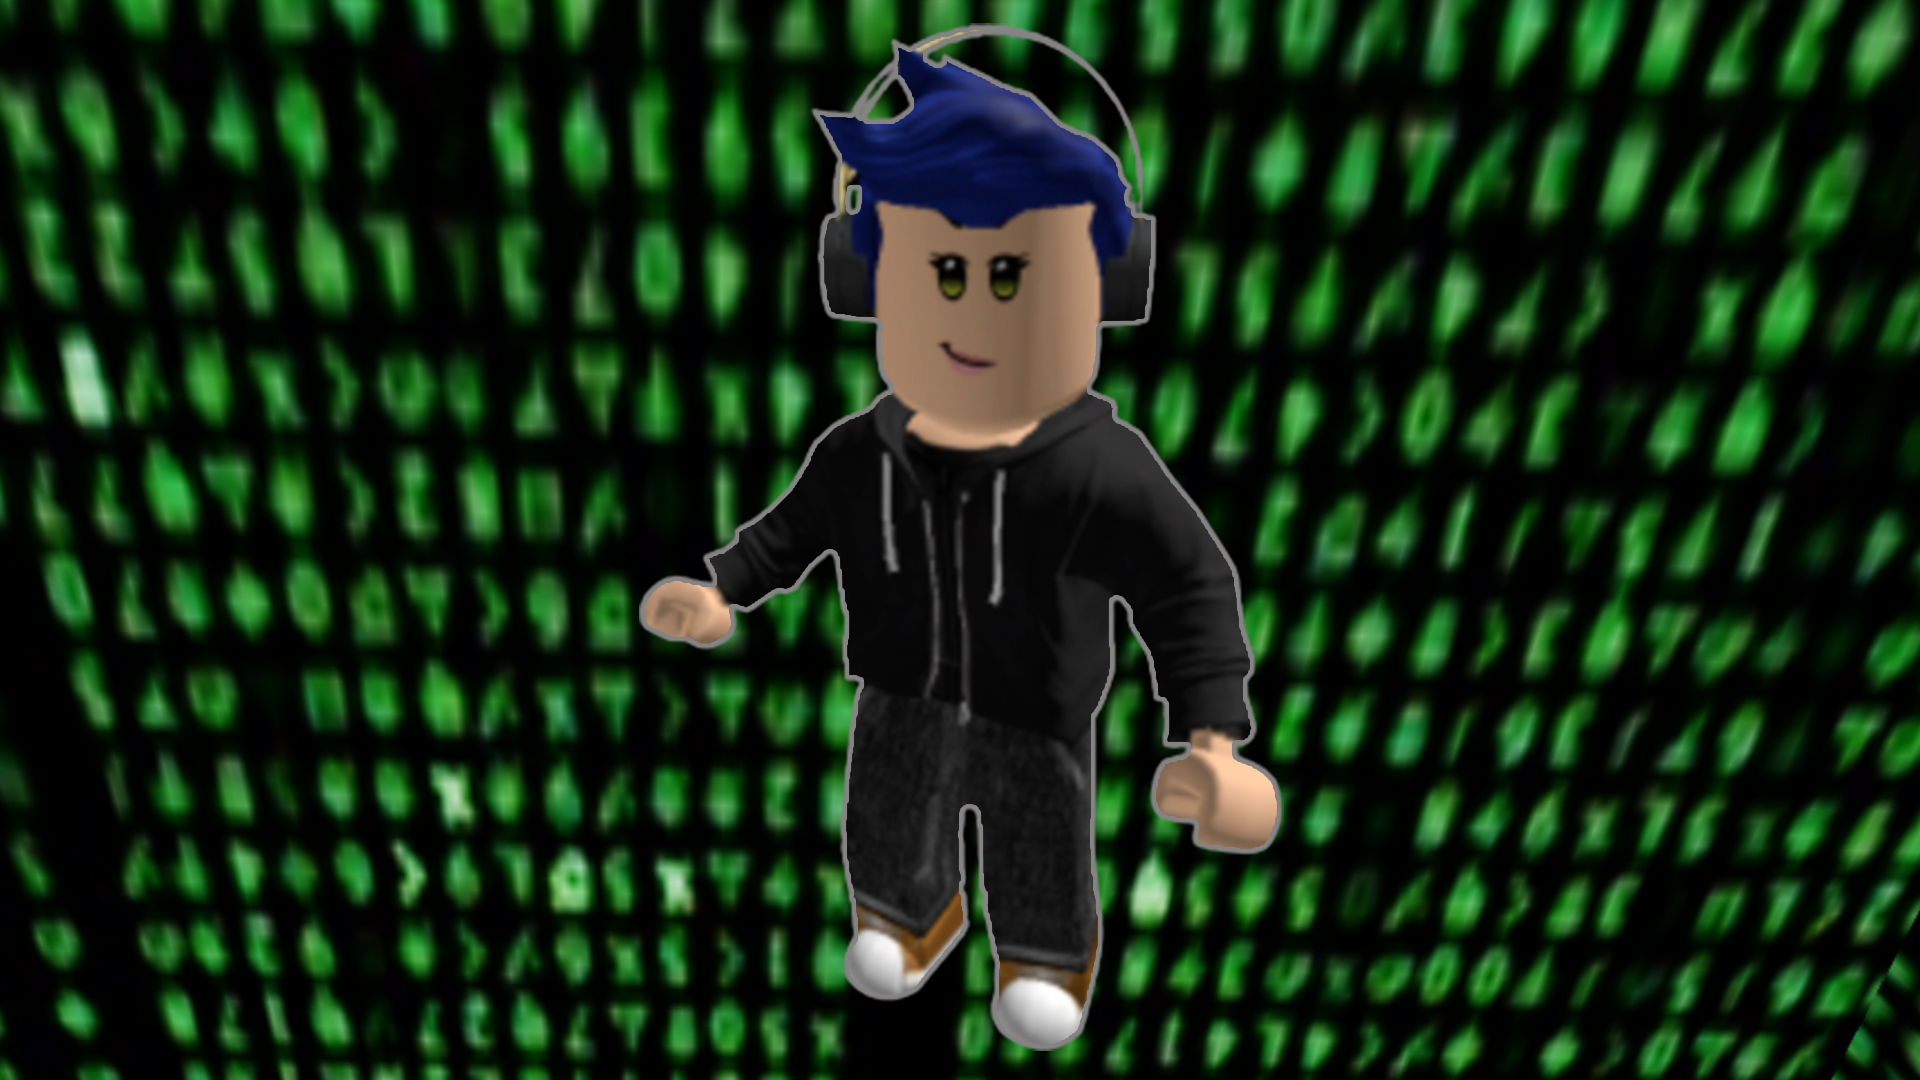 Roblox developers are burning out in their fight against hackers